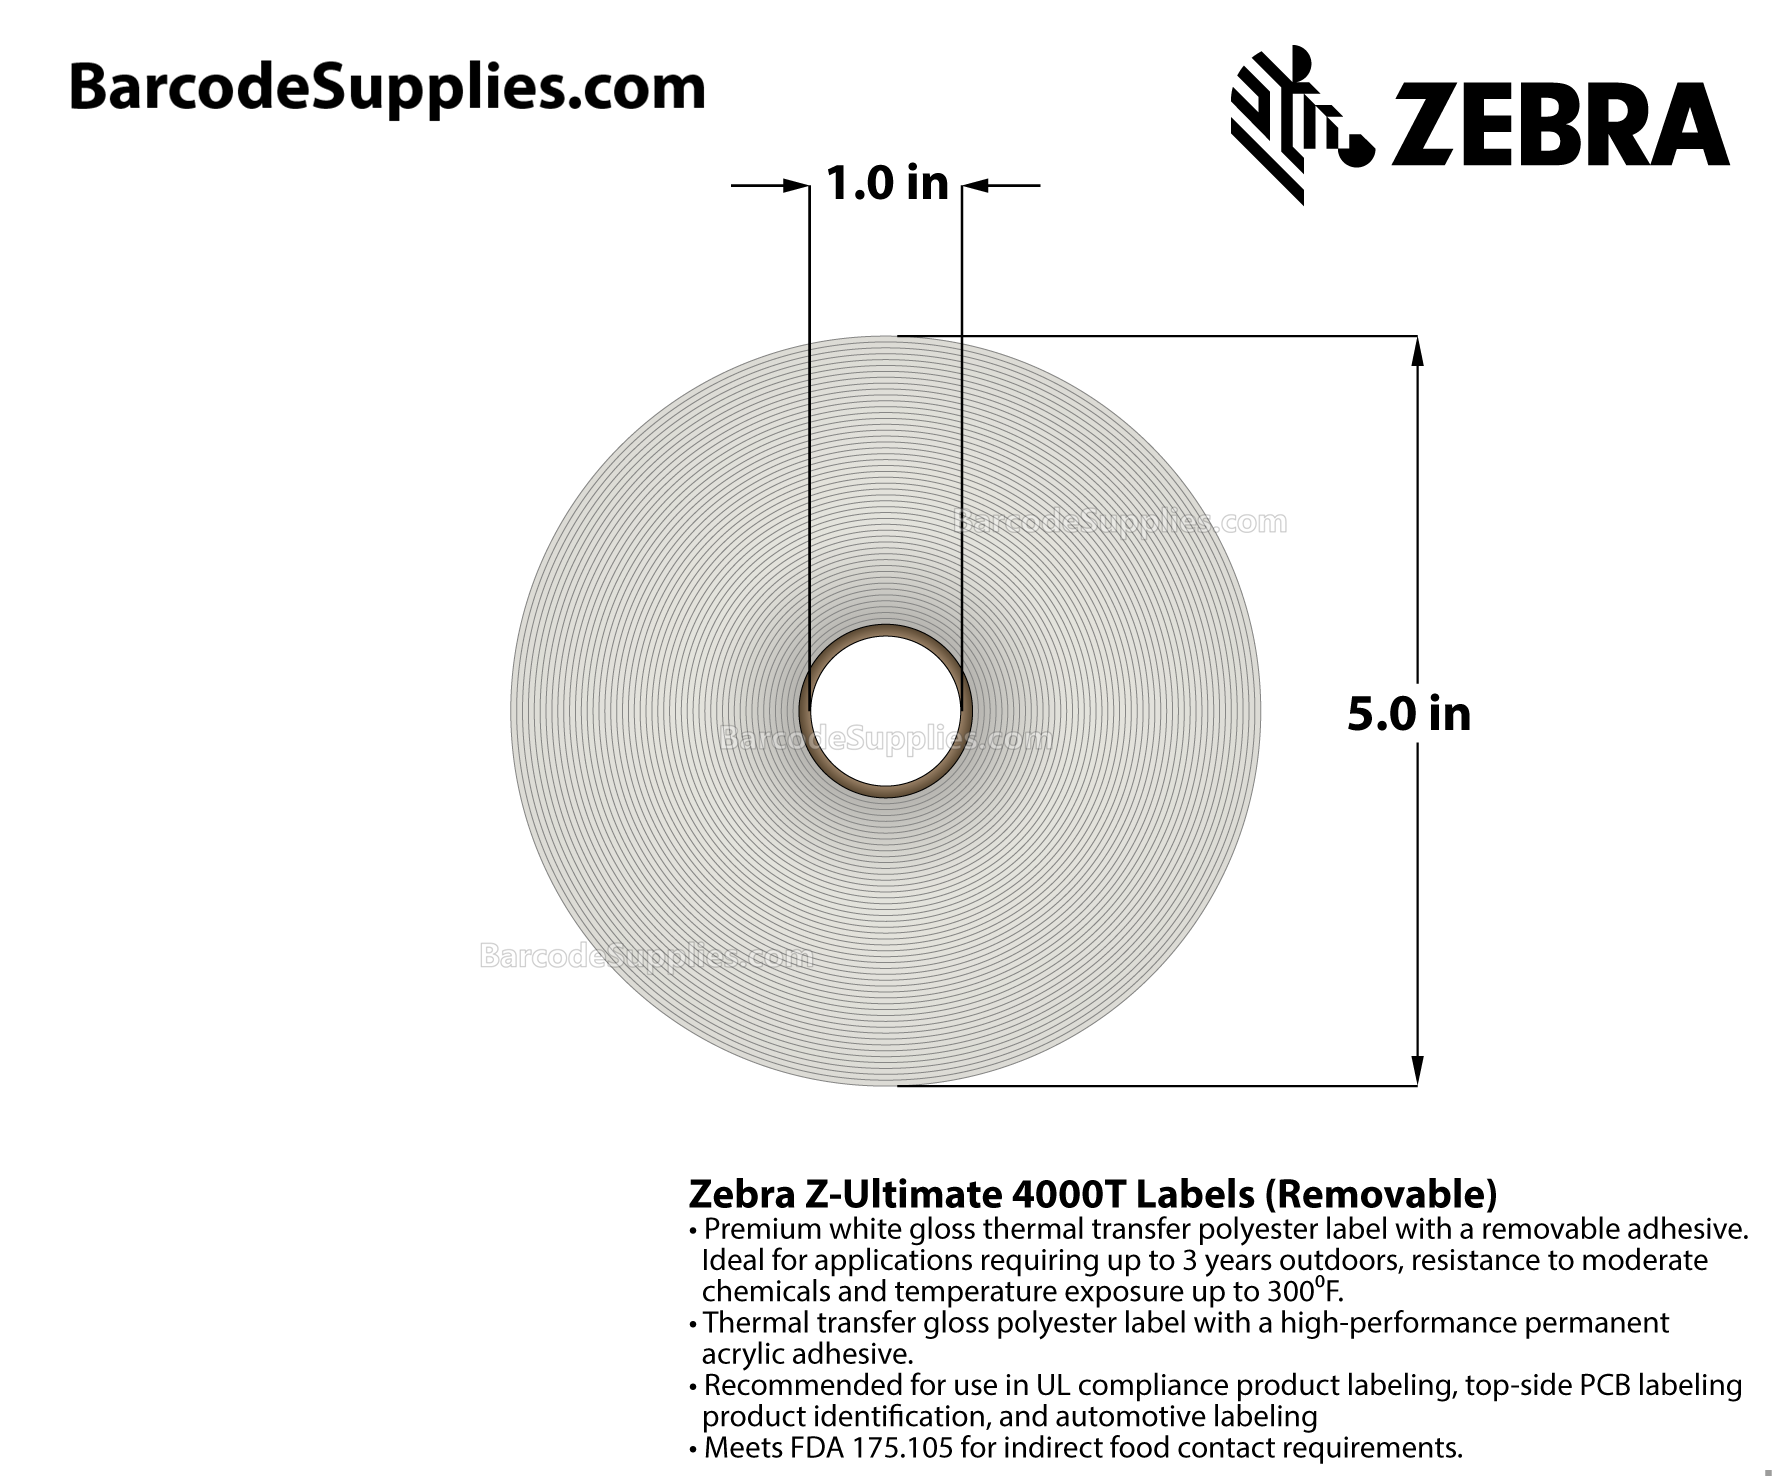 1 x 2 Thermal Transfer White Z-Ultimate 4000T Removable Labels With Removable Adhesive - Perforated - 1500 Labels Per Roll - Carton Of 1 Rolls - 1500 Labels Total - MPN: 10023148